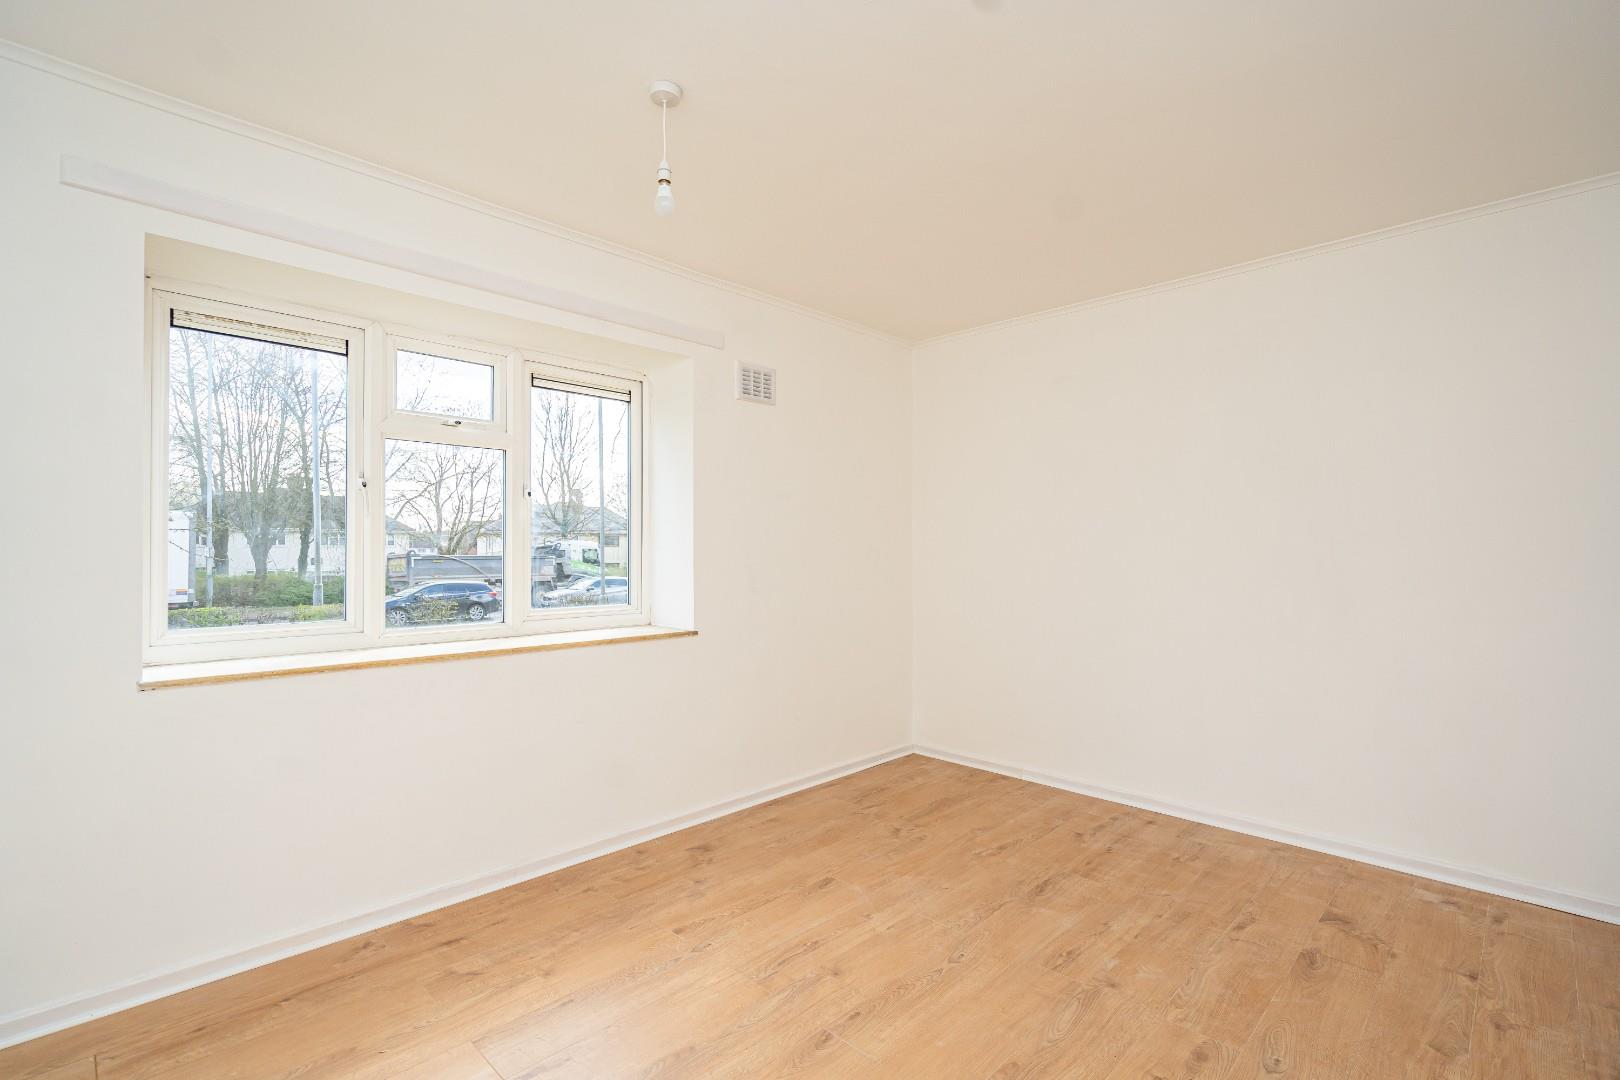 Property image for Willenhall Road, Wolverhampton